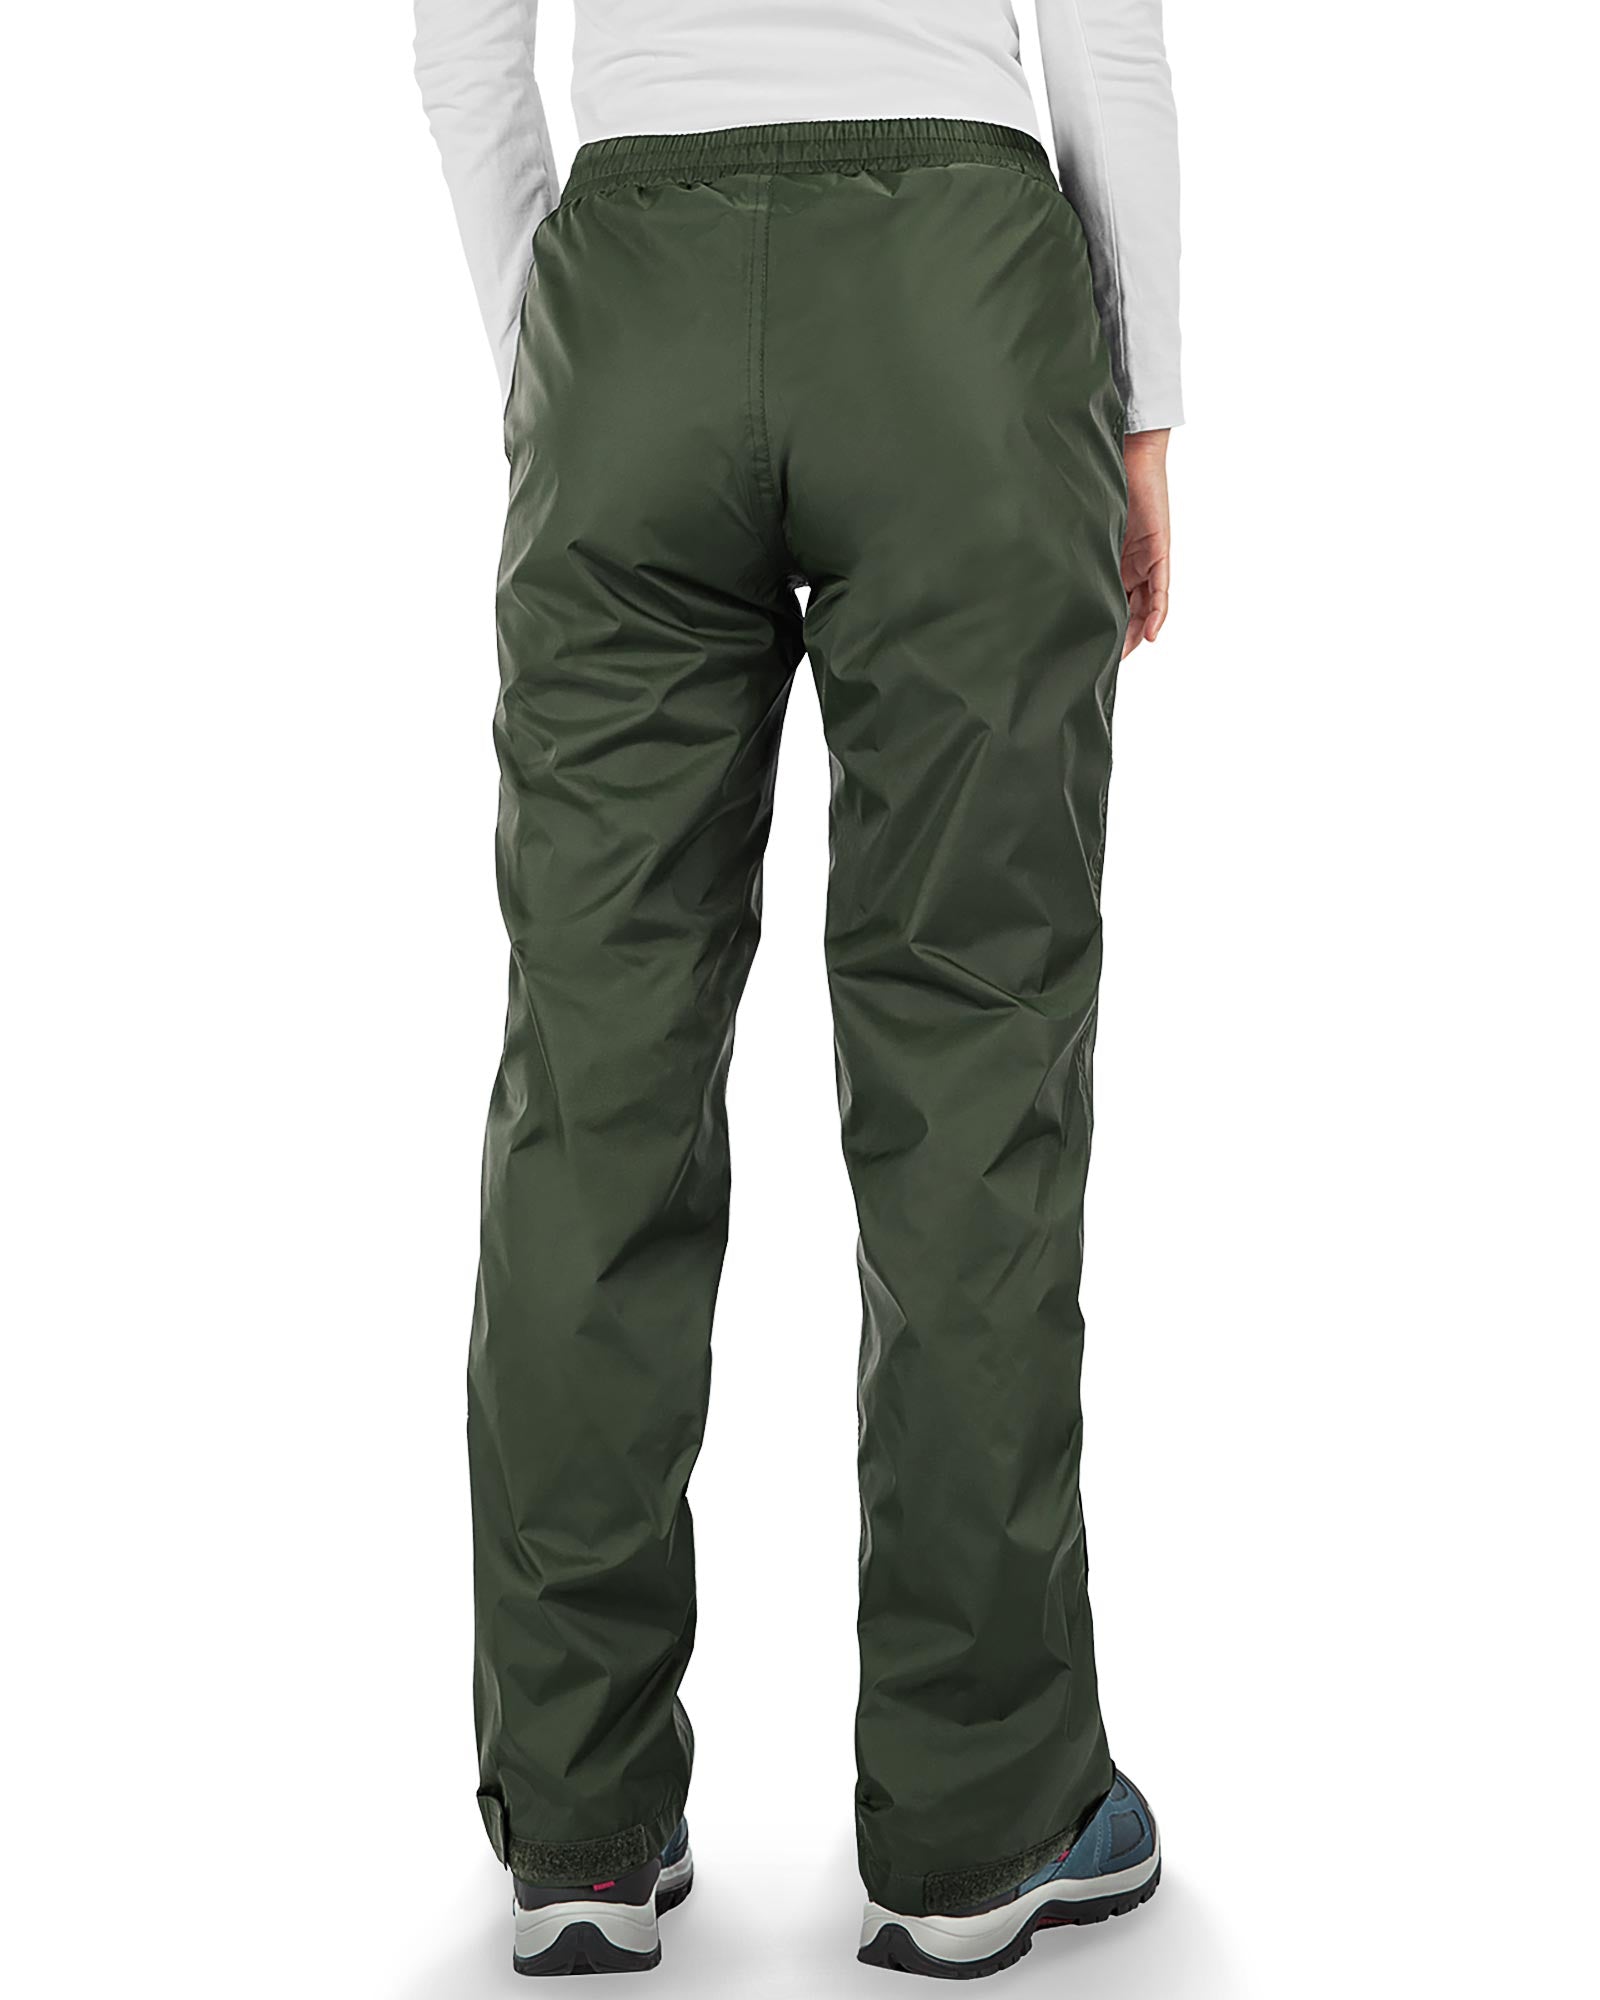 NEW** Waterproof Rain Pants with braces - Red Oak, by fairechild – Puddlebug